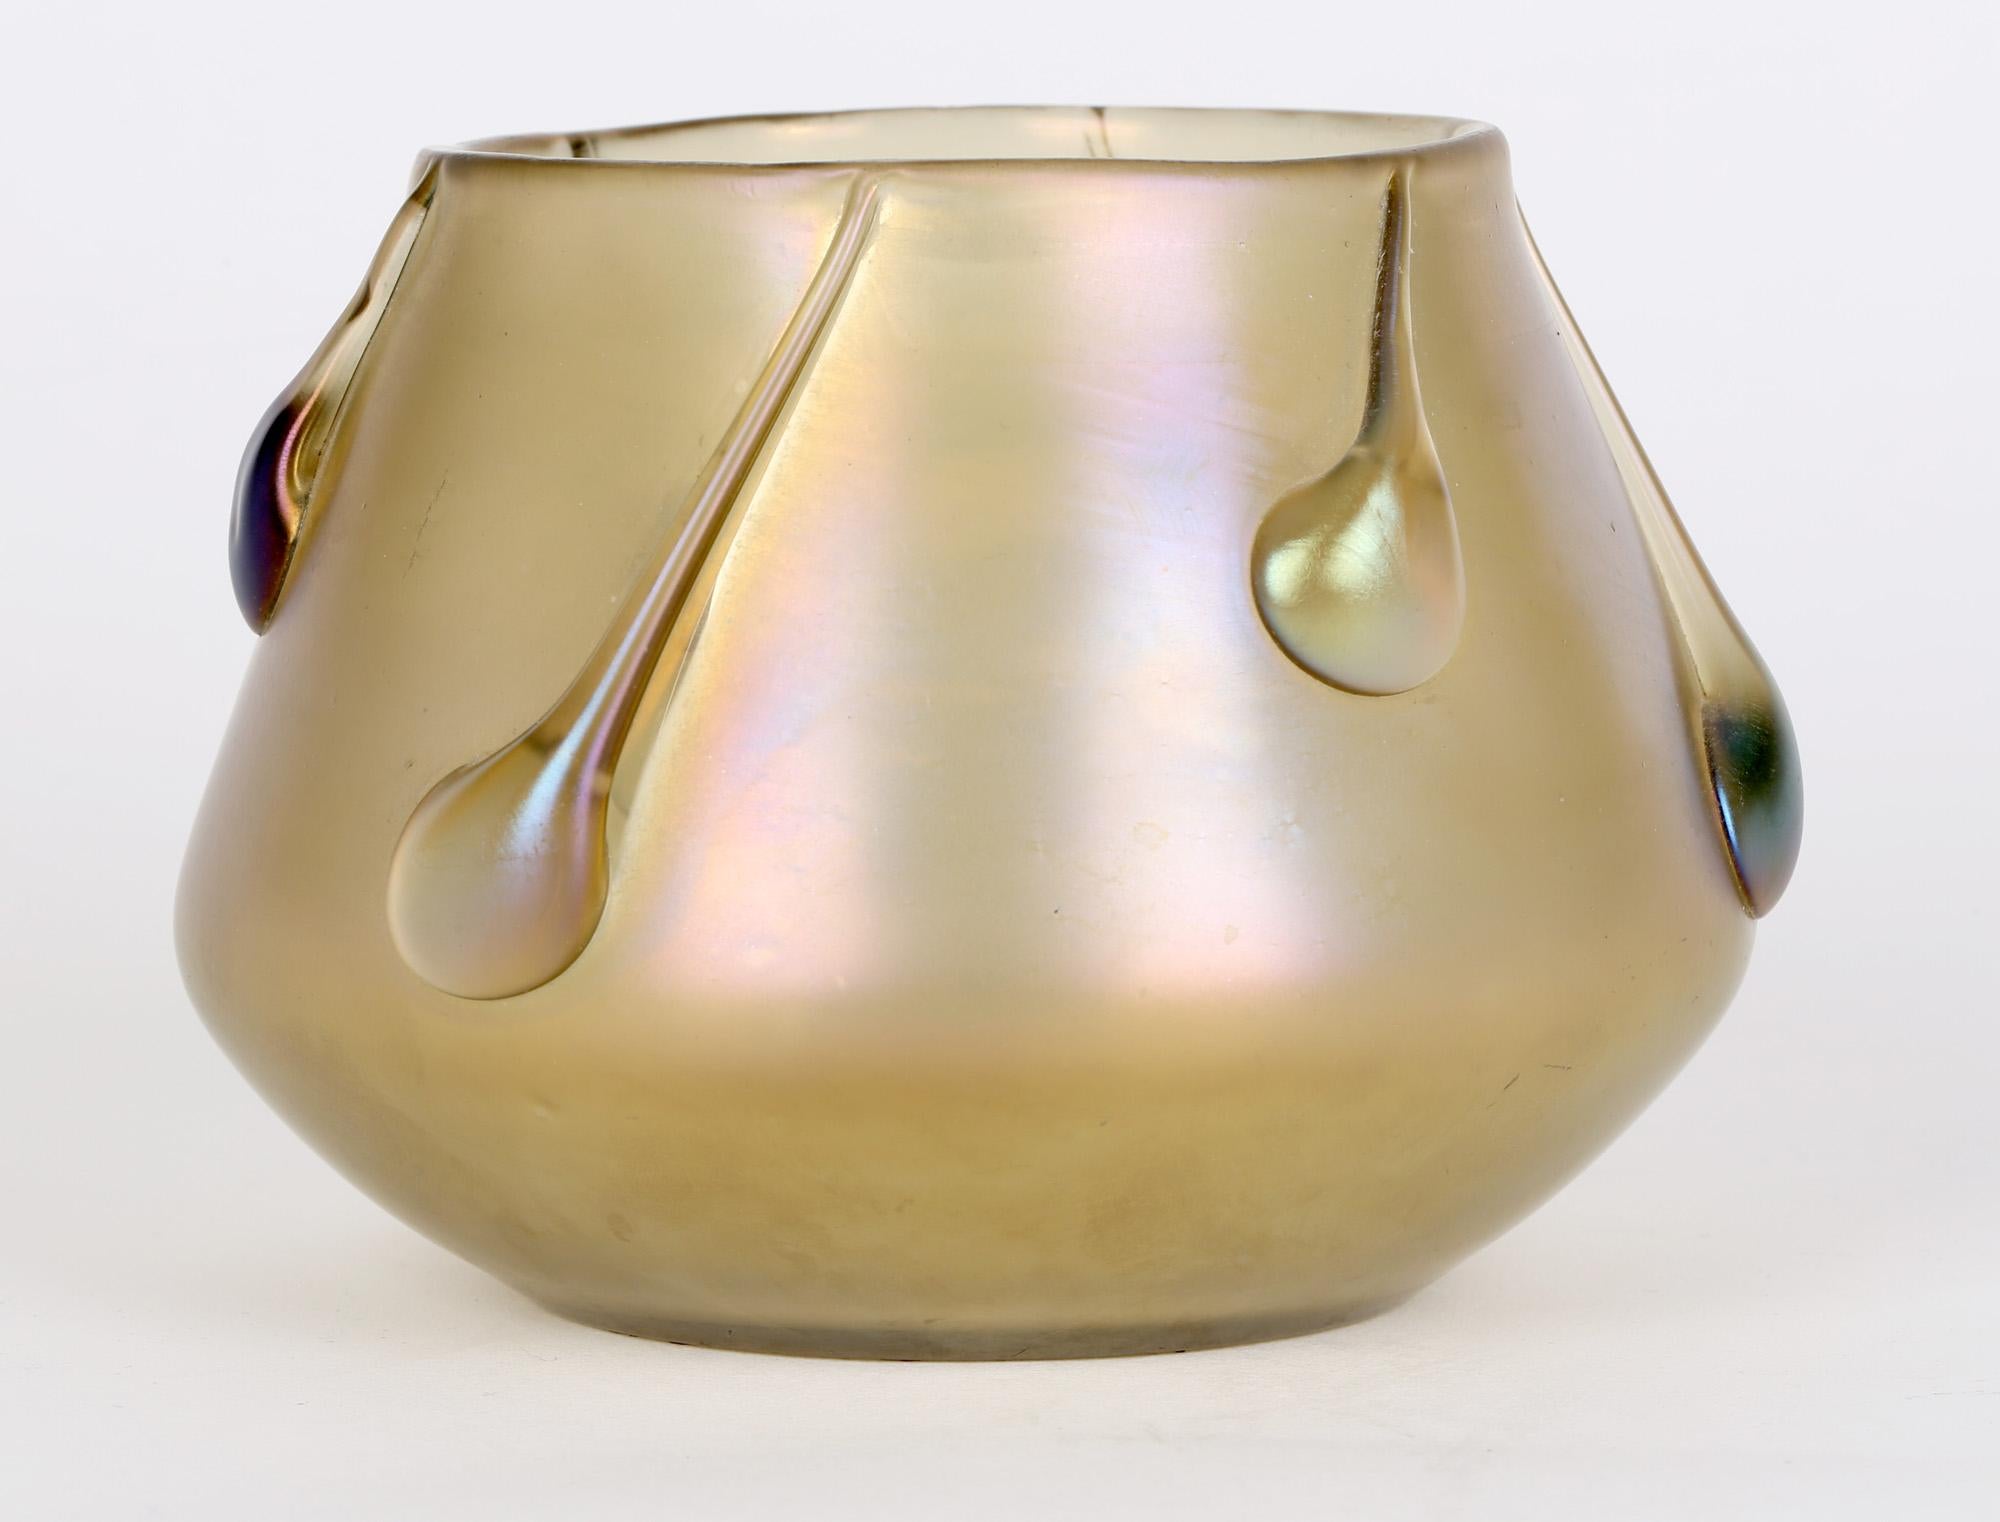 Stylish Bohemian Vesuvian Candia iridescent glass vase with tadpoles by Johann Loetz Witwe and dating from around 1901. The simply shaped wide vase has a wonderful golden iridescence with multiple colors and with six tadpole designs applied around